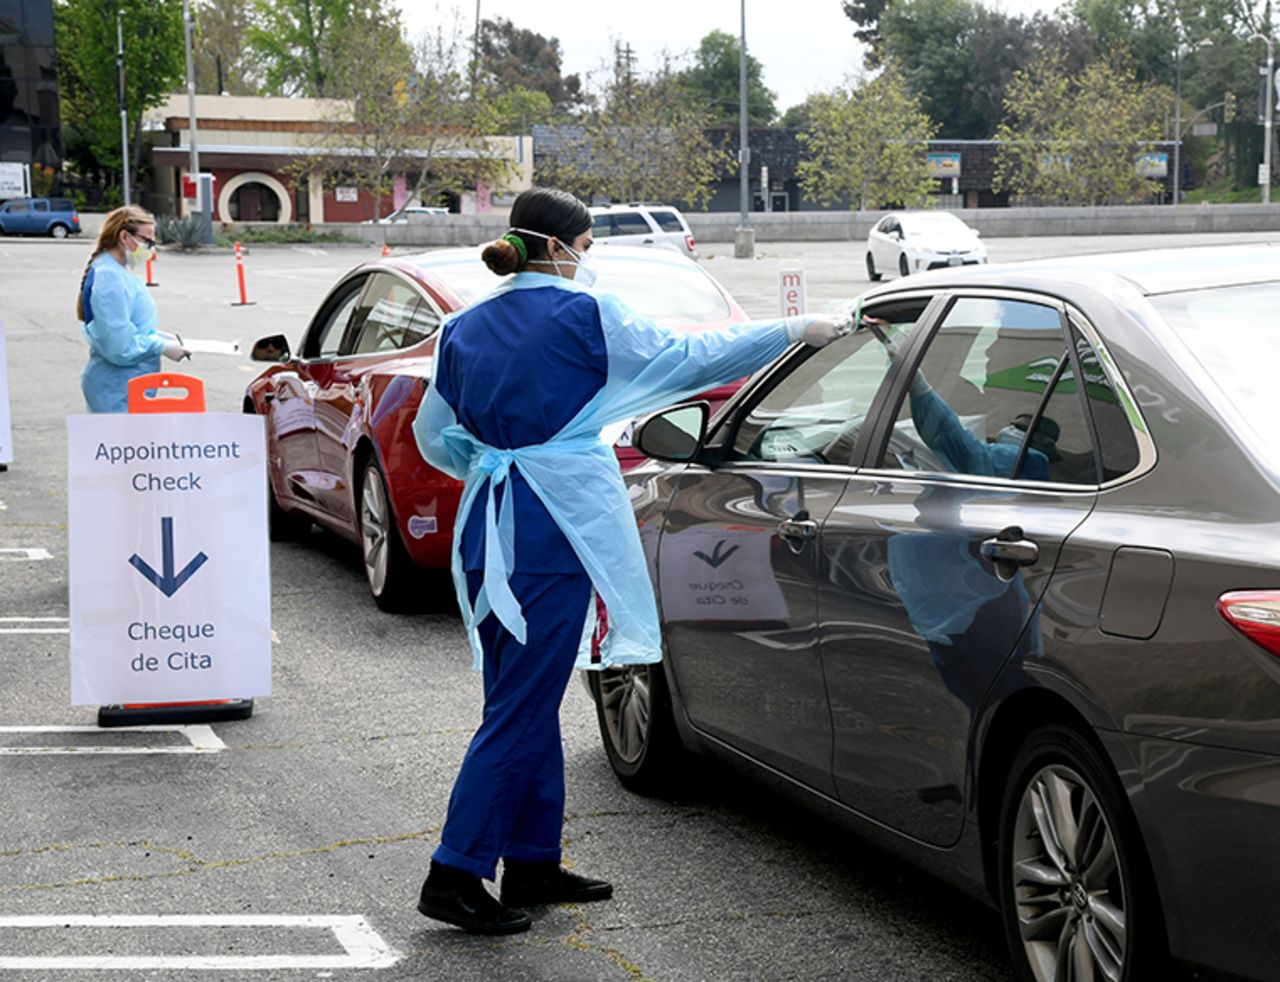 Workers wearing personal protective equipment gather the tests administered from people's cars as Mend Urgent Care hosts a drive-thru testin at the Westfield Fashion Square on Monday,April 13, in Los Angeles